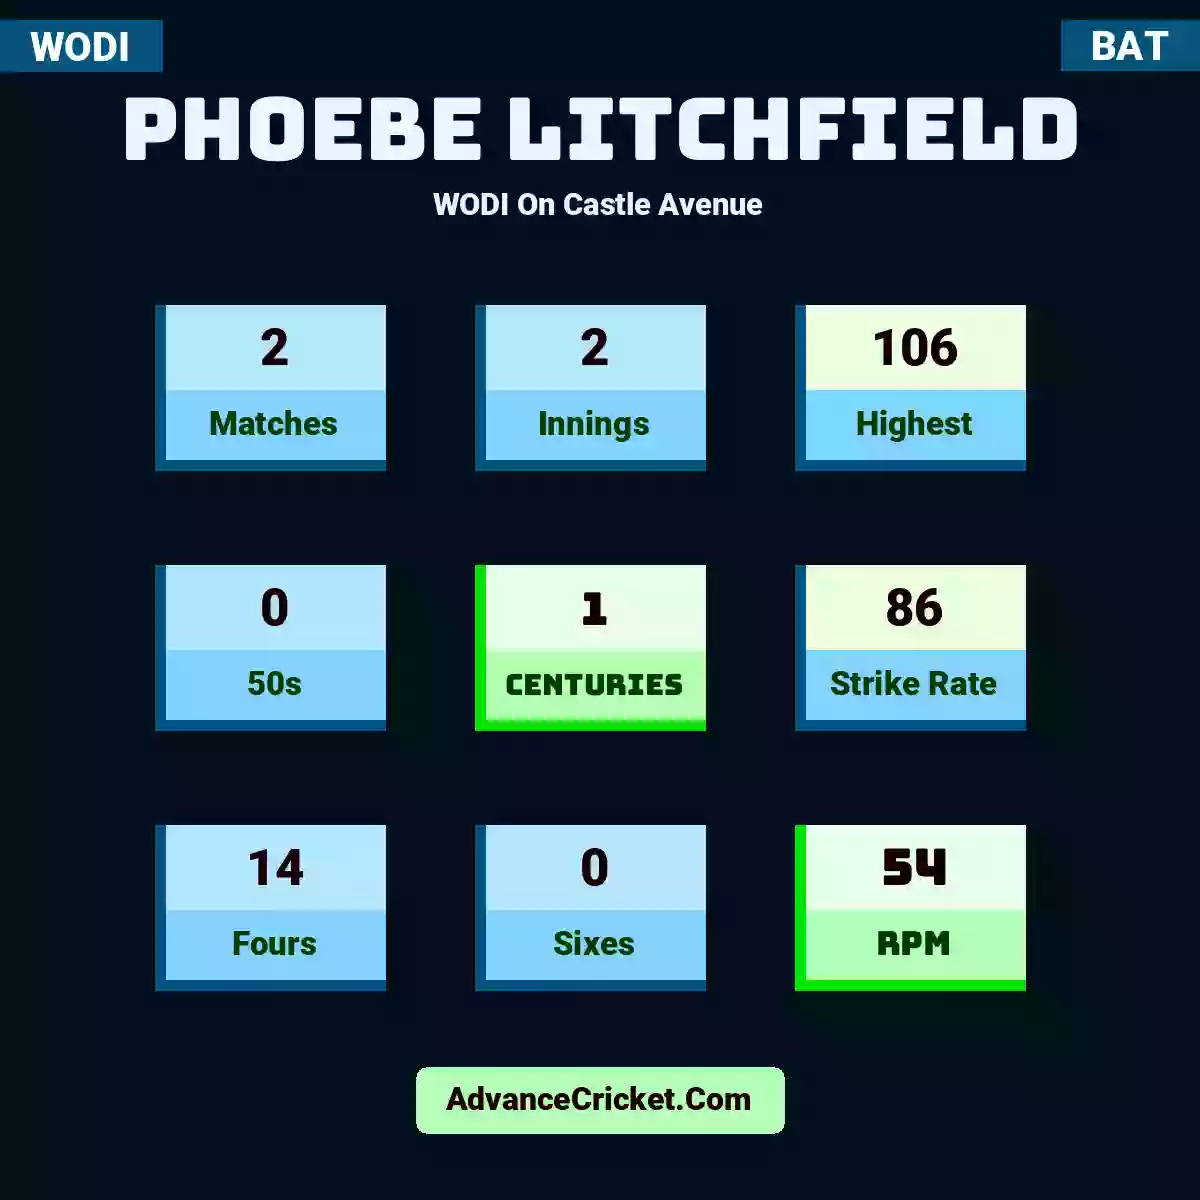 Phoebe Litchfield WODI  On Castle Avenue, Phoebe Litchfield played 2 matches, scored 106 runs as highest, 0 half-centuries, and 1 centuries, with a strike rate of 86. P.Litchfield hit 14 fours and 0 sixes, with an RPM of 54.